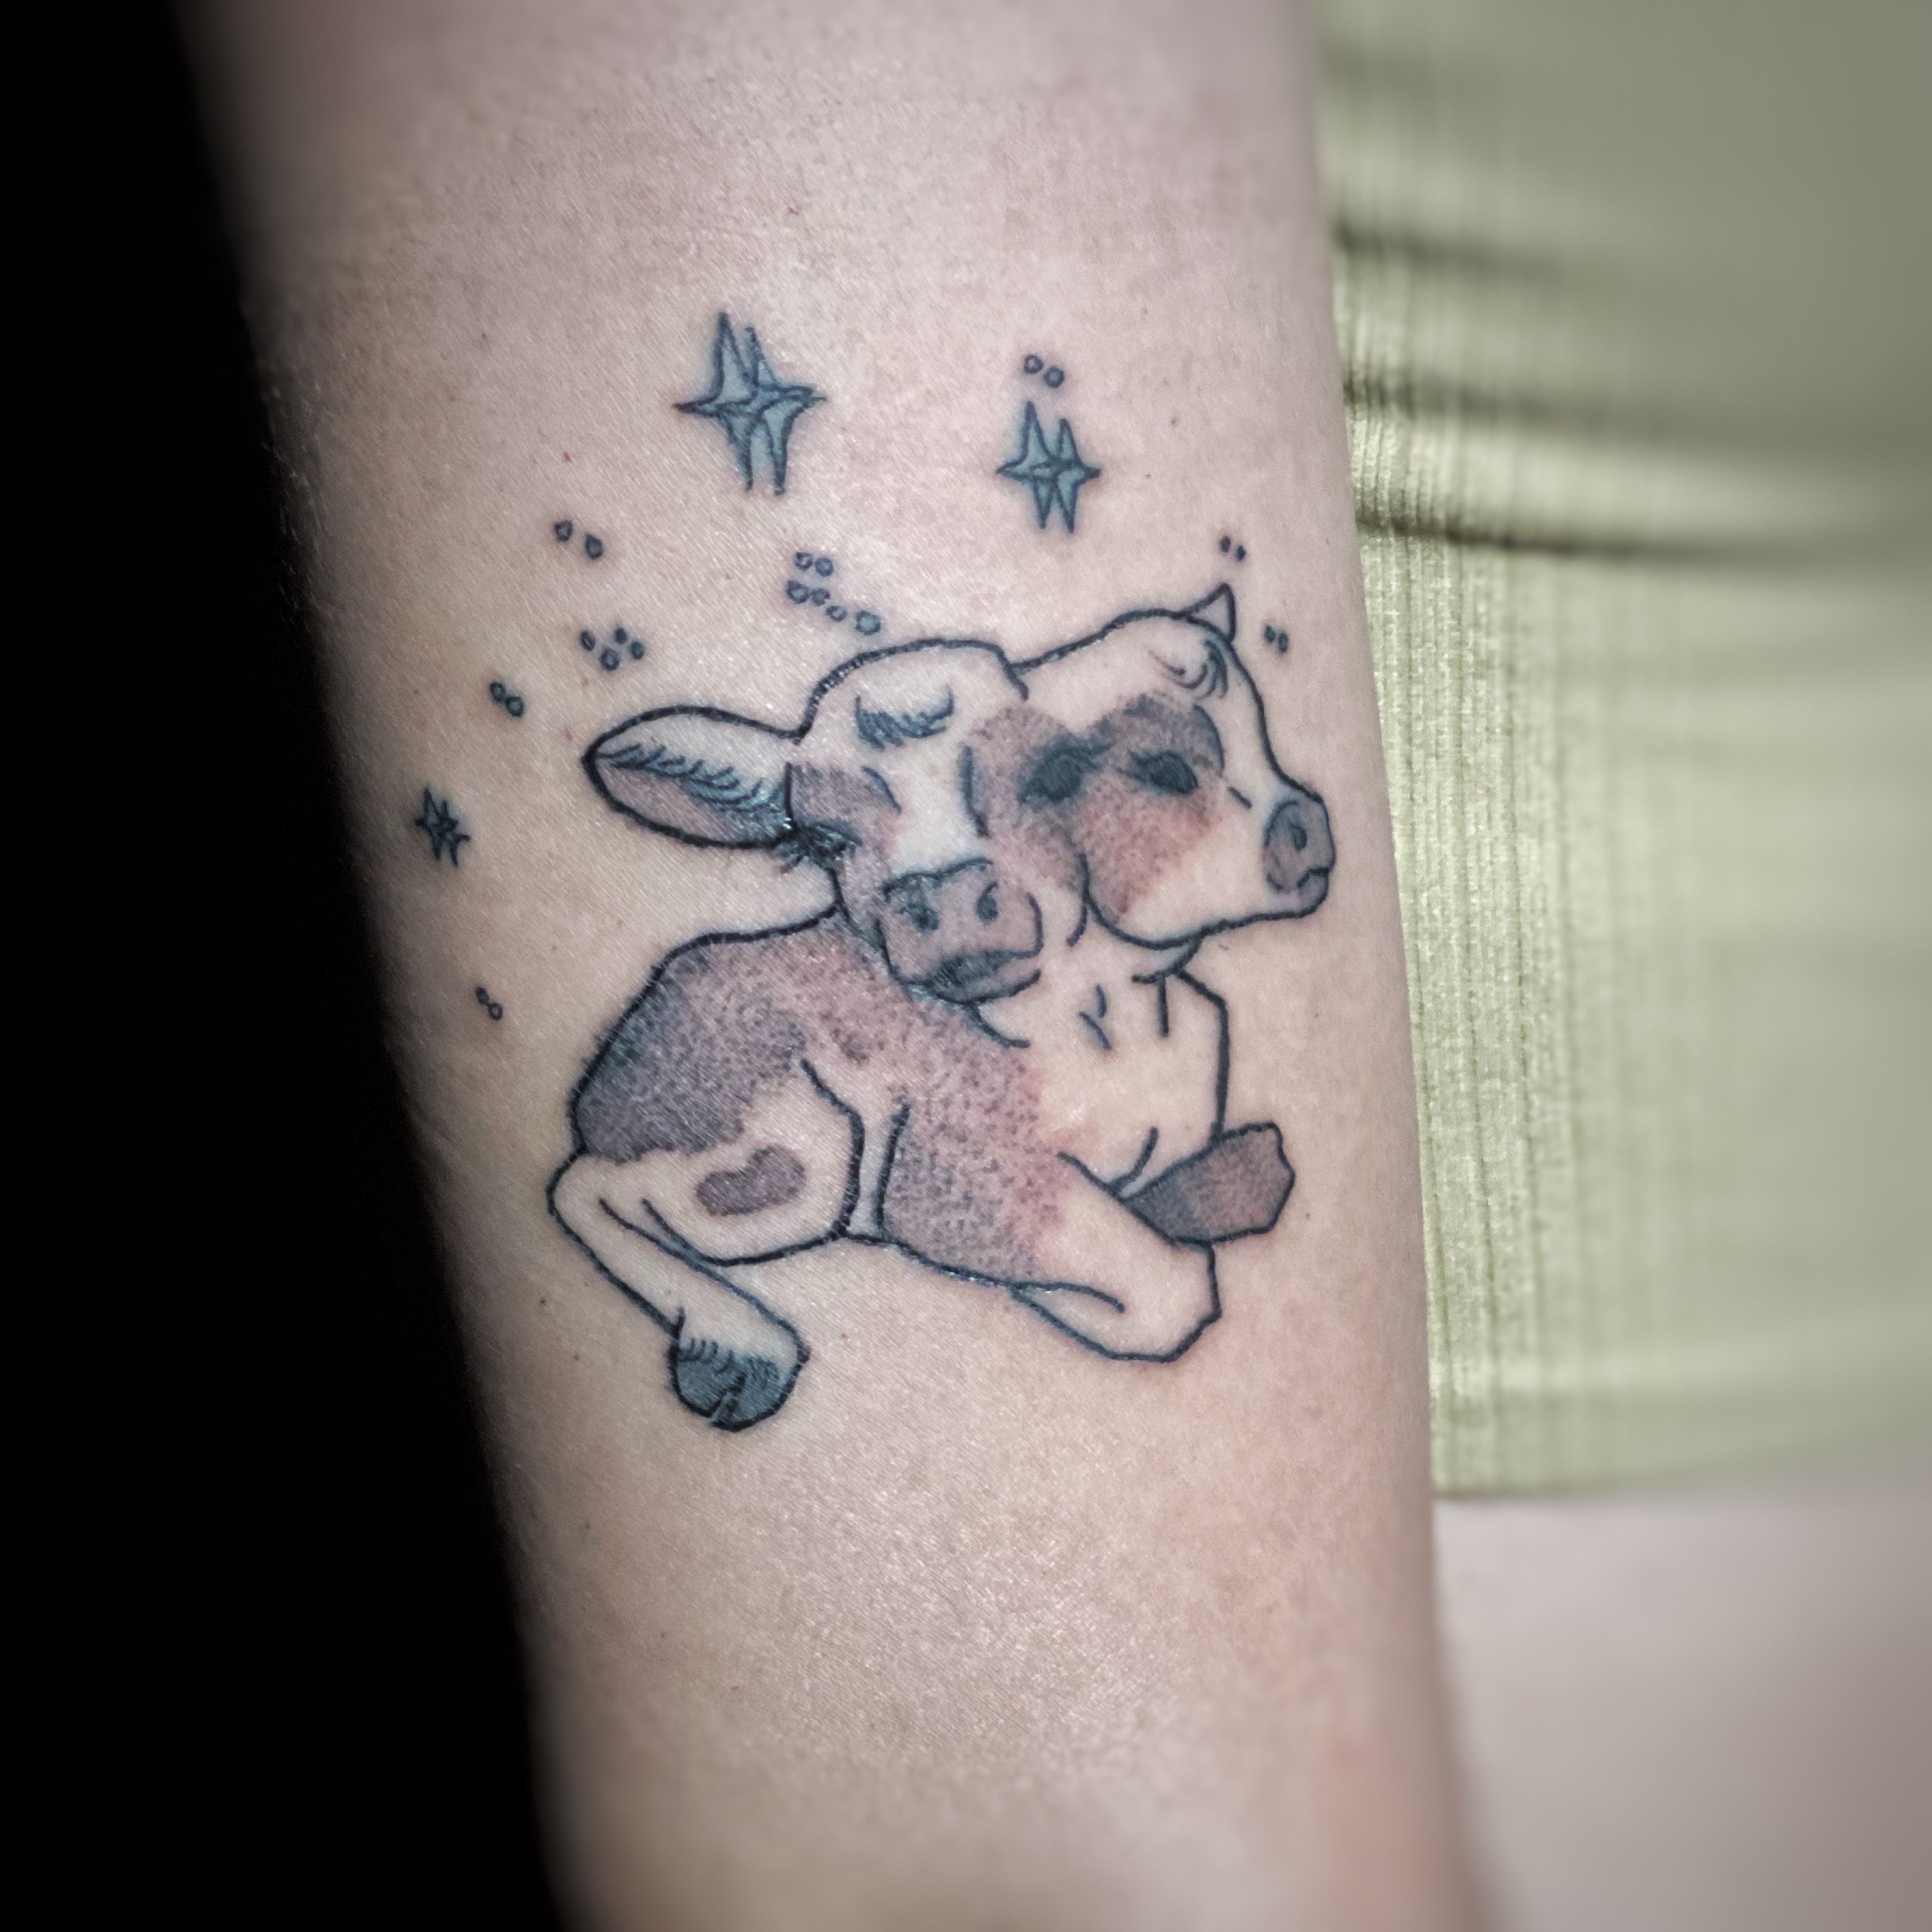 i got a tattoo inspired by my favorite poem the twoheaded calf by laura  gilpin done by cali at magnum opus tattoo collective in somers point NJ   rtattoos